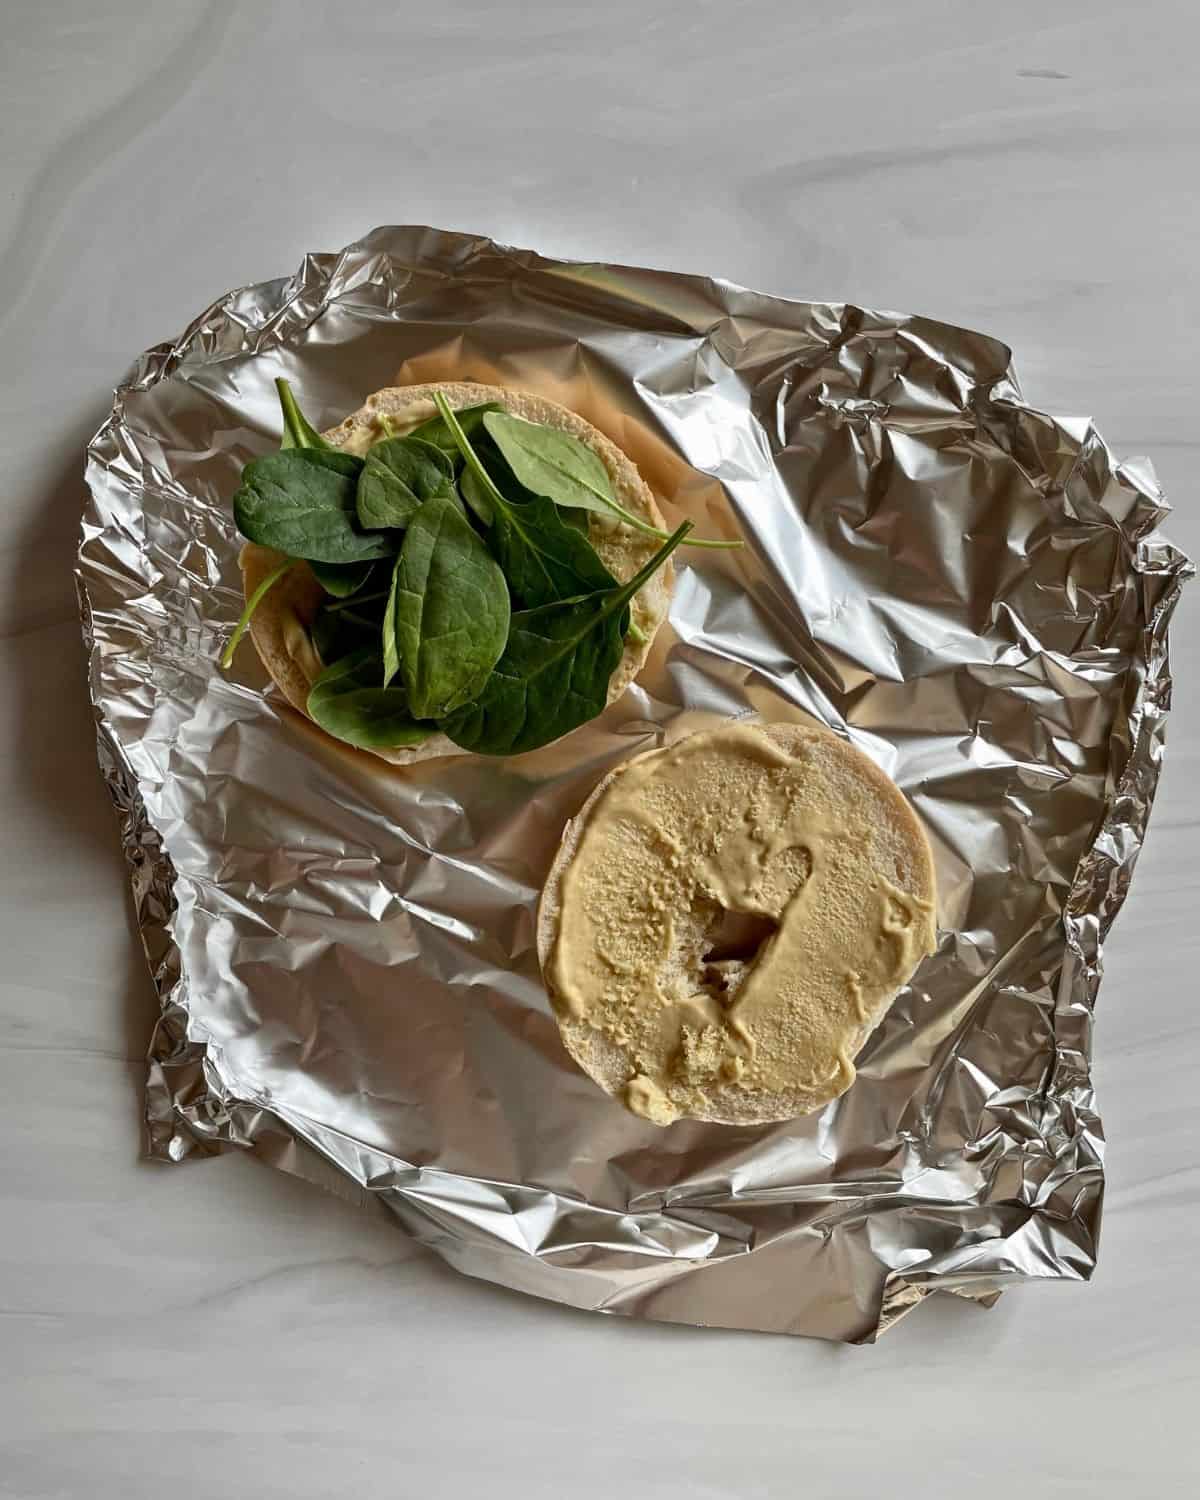 Open bagel on foil with spinach and Dijon mayo.